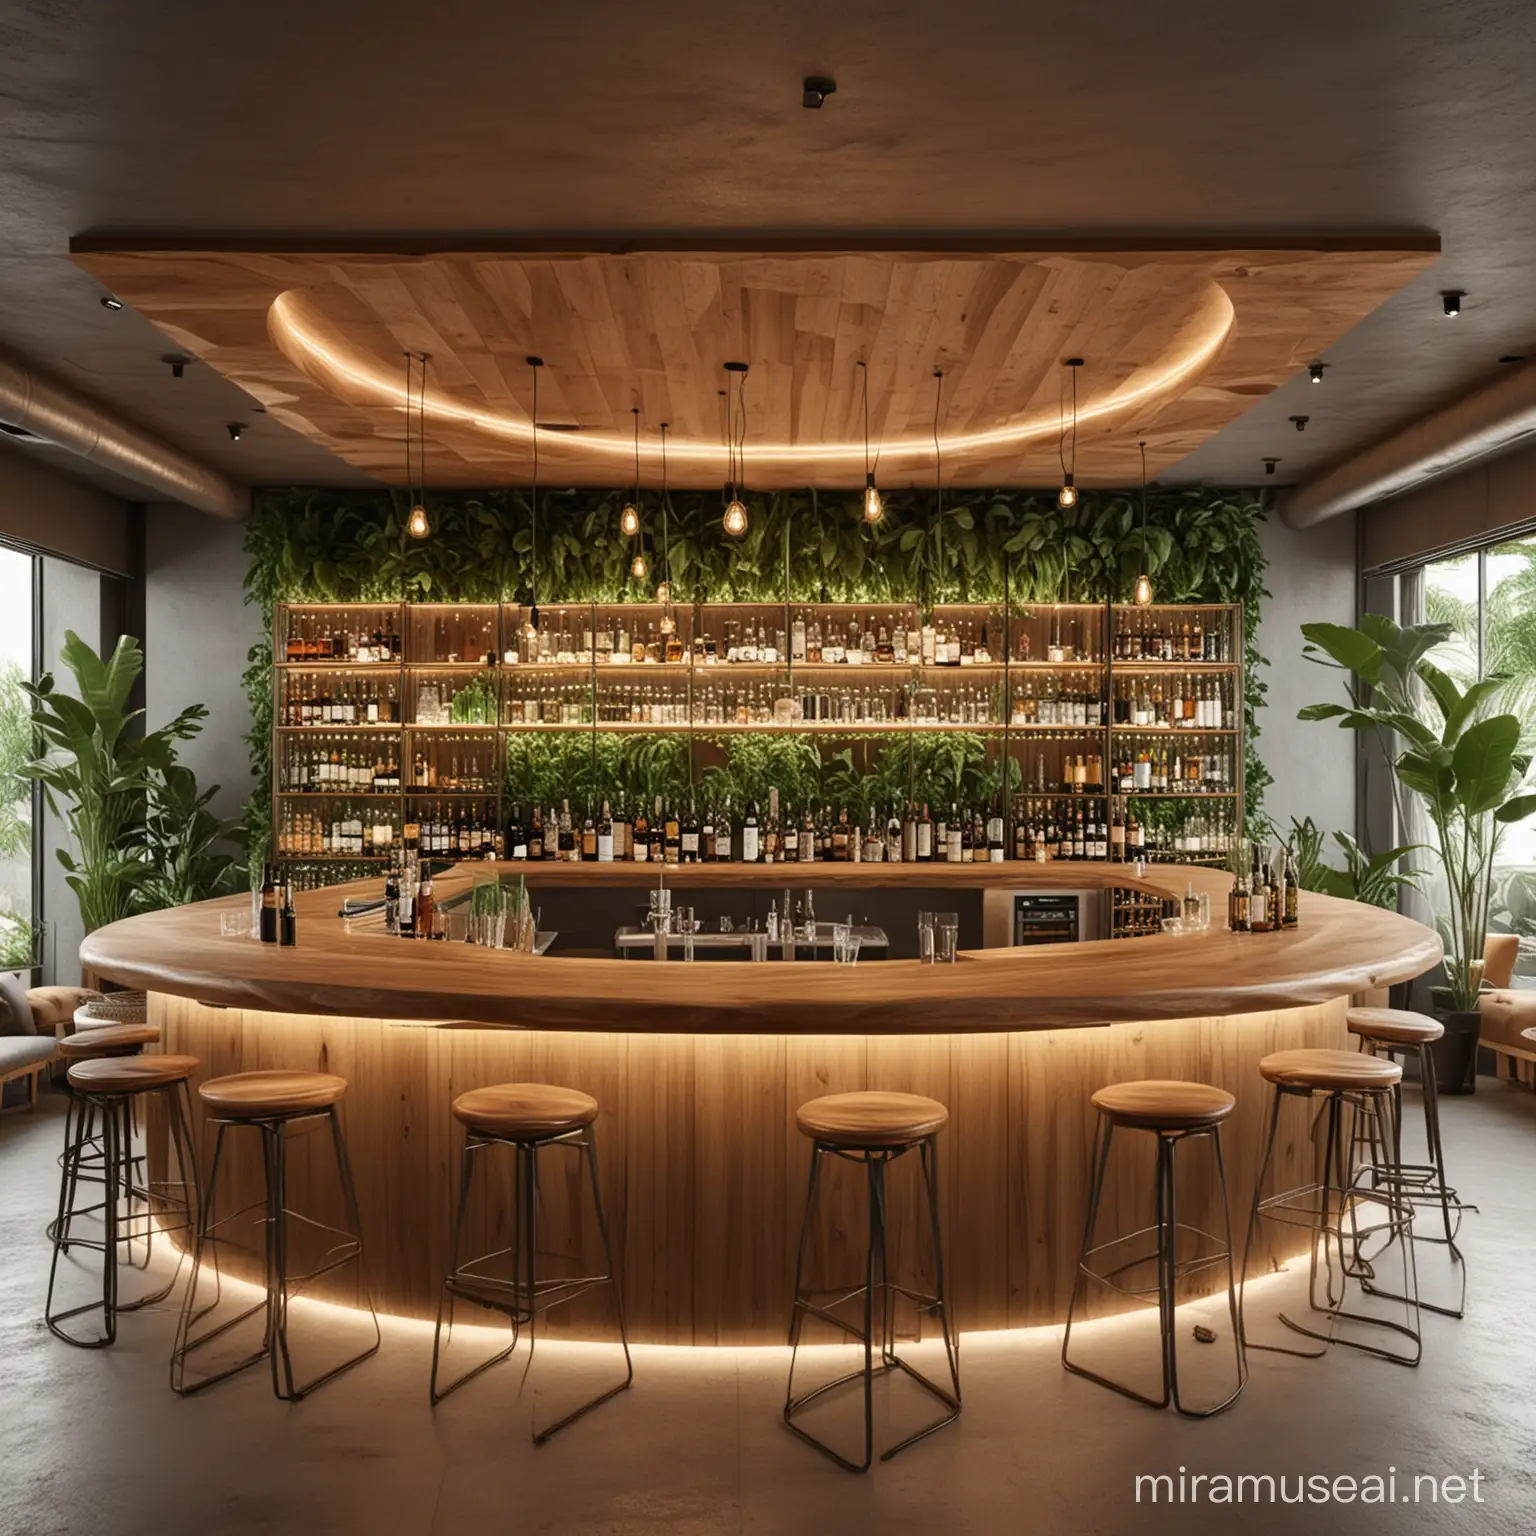 i want to create a modern organic bar and resturant
